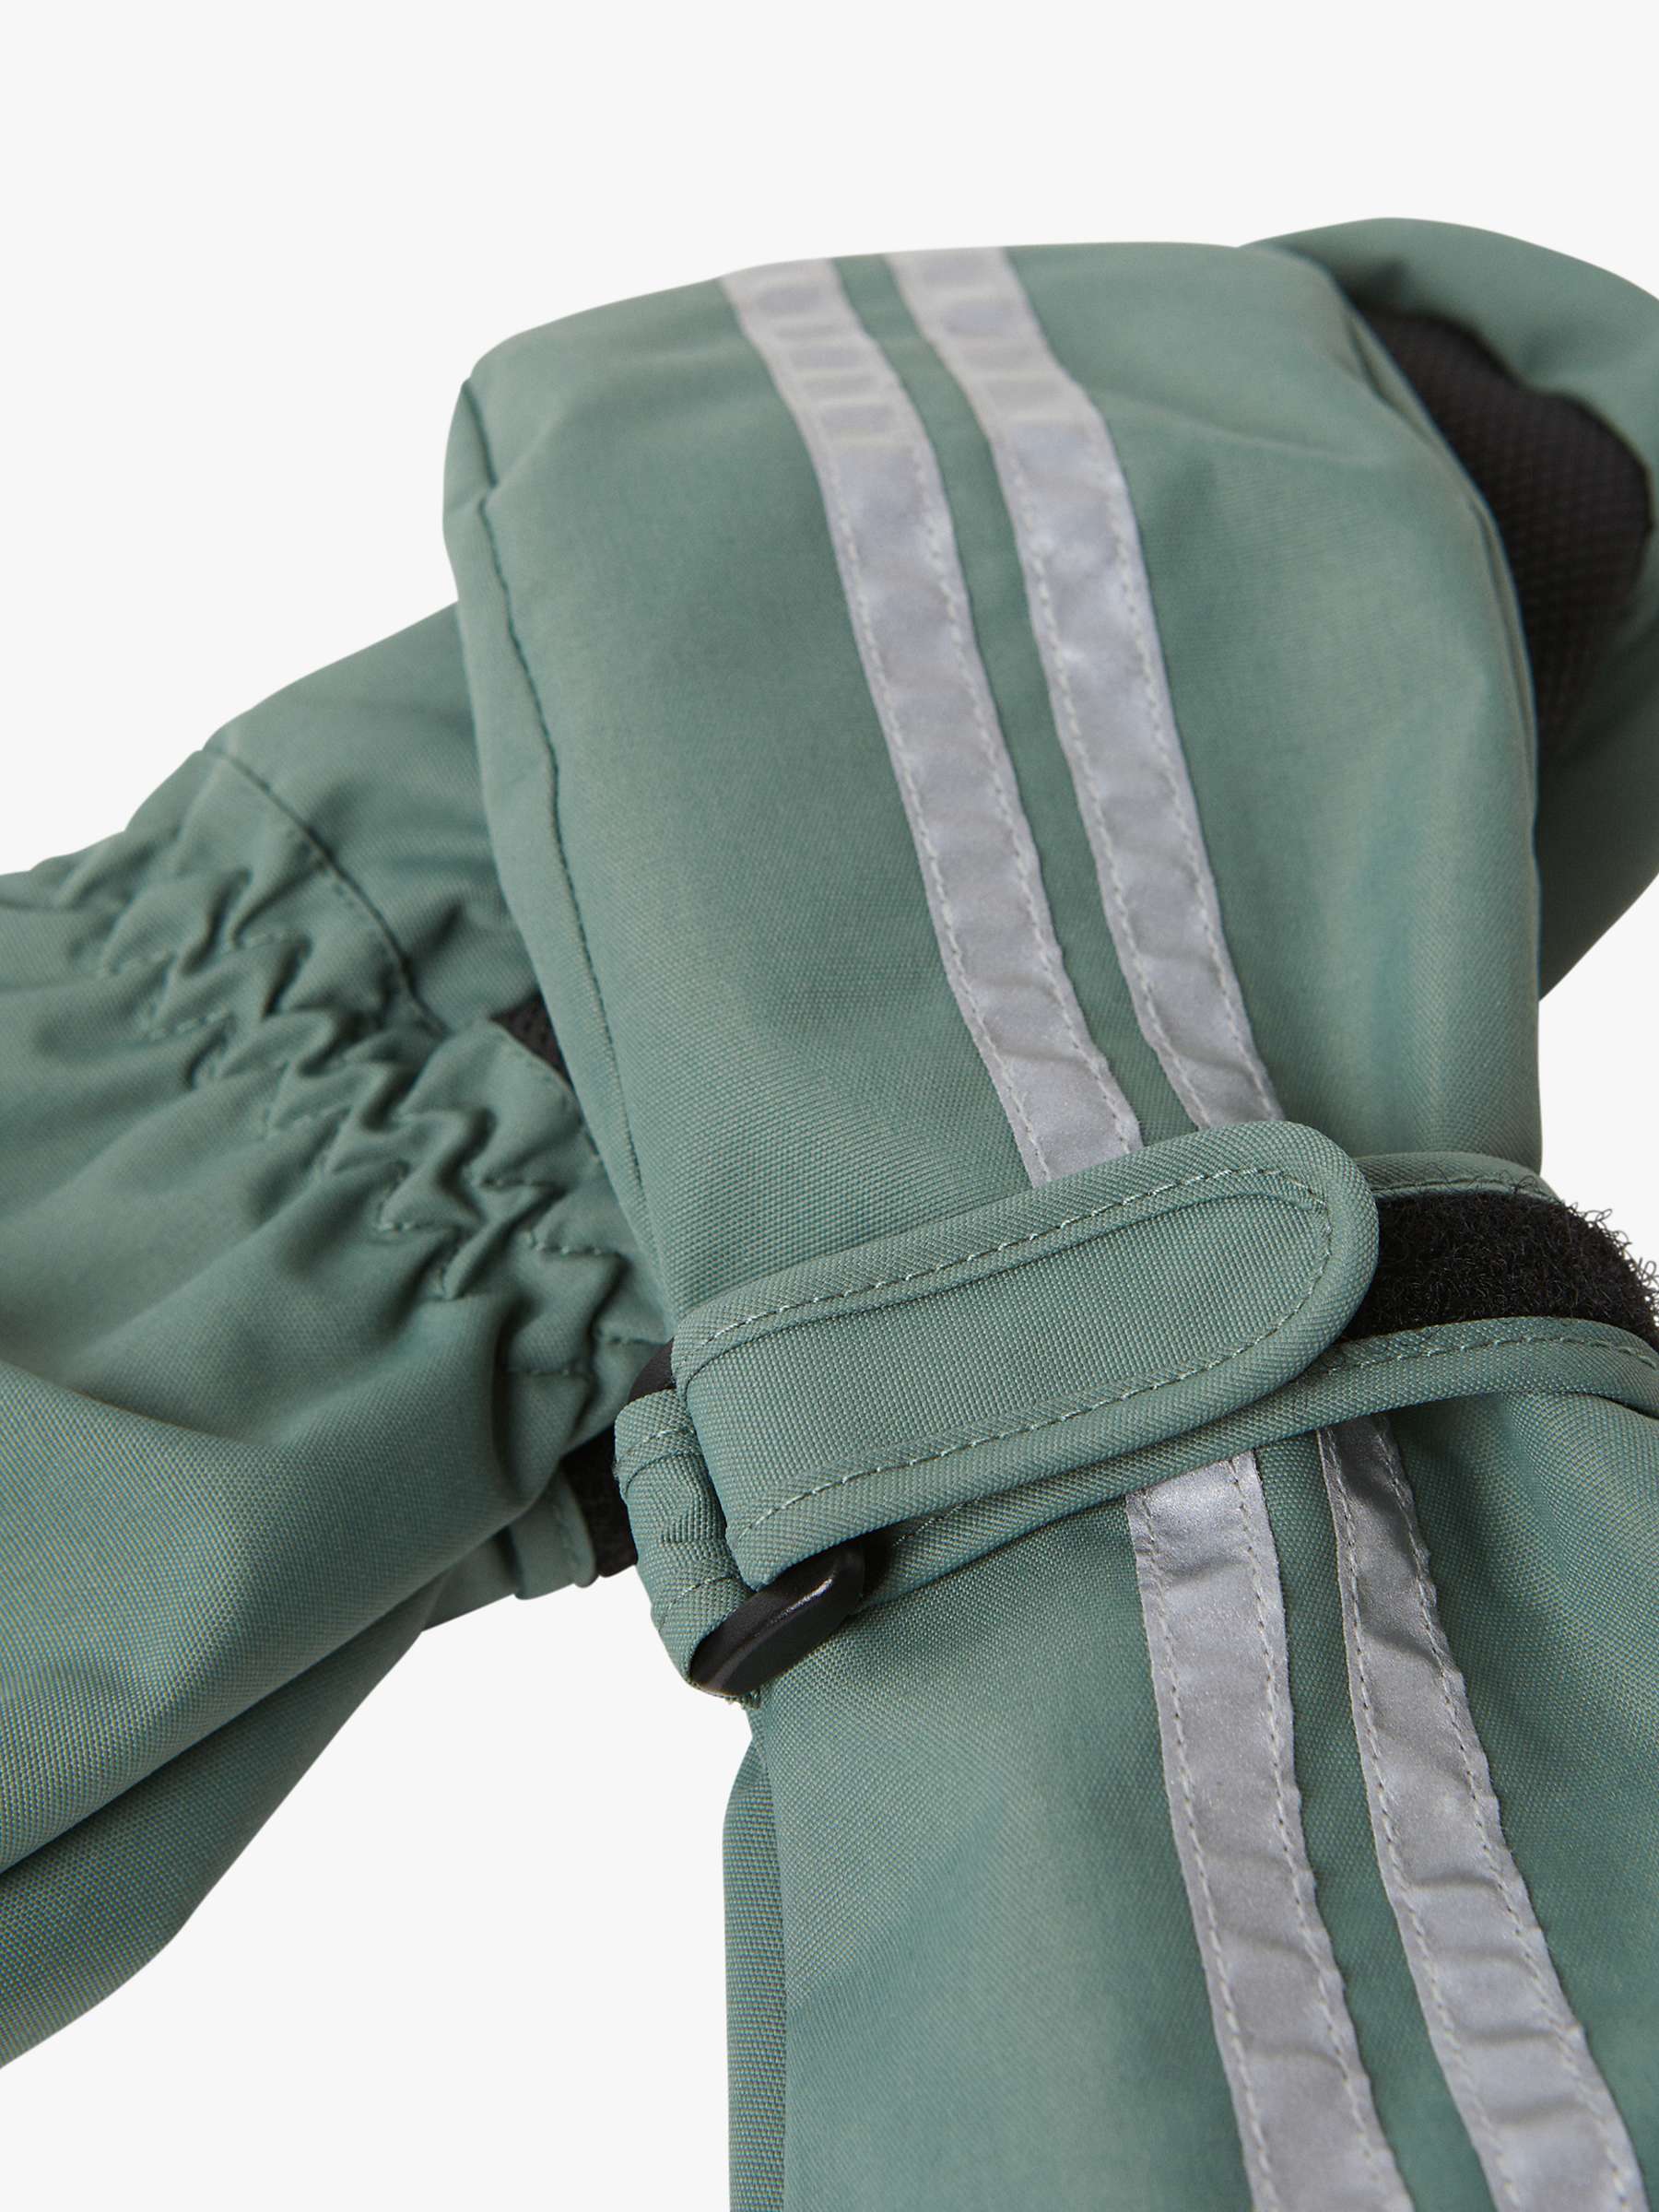 Buy Polarn O. Pyret Kids' Windproof & Waterproof Shell Mittens Online at johnlewis.com